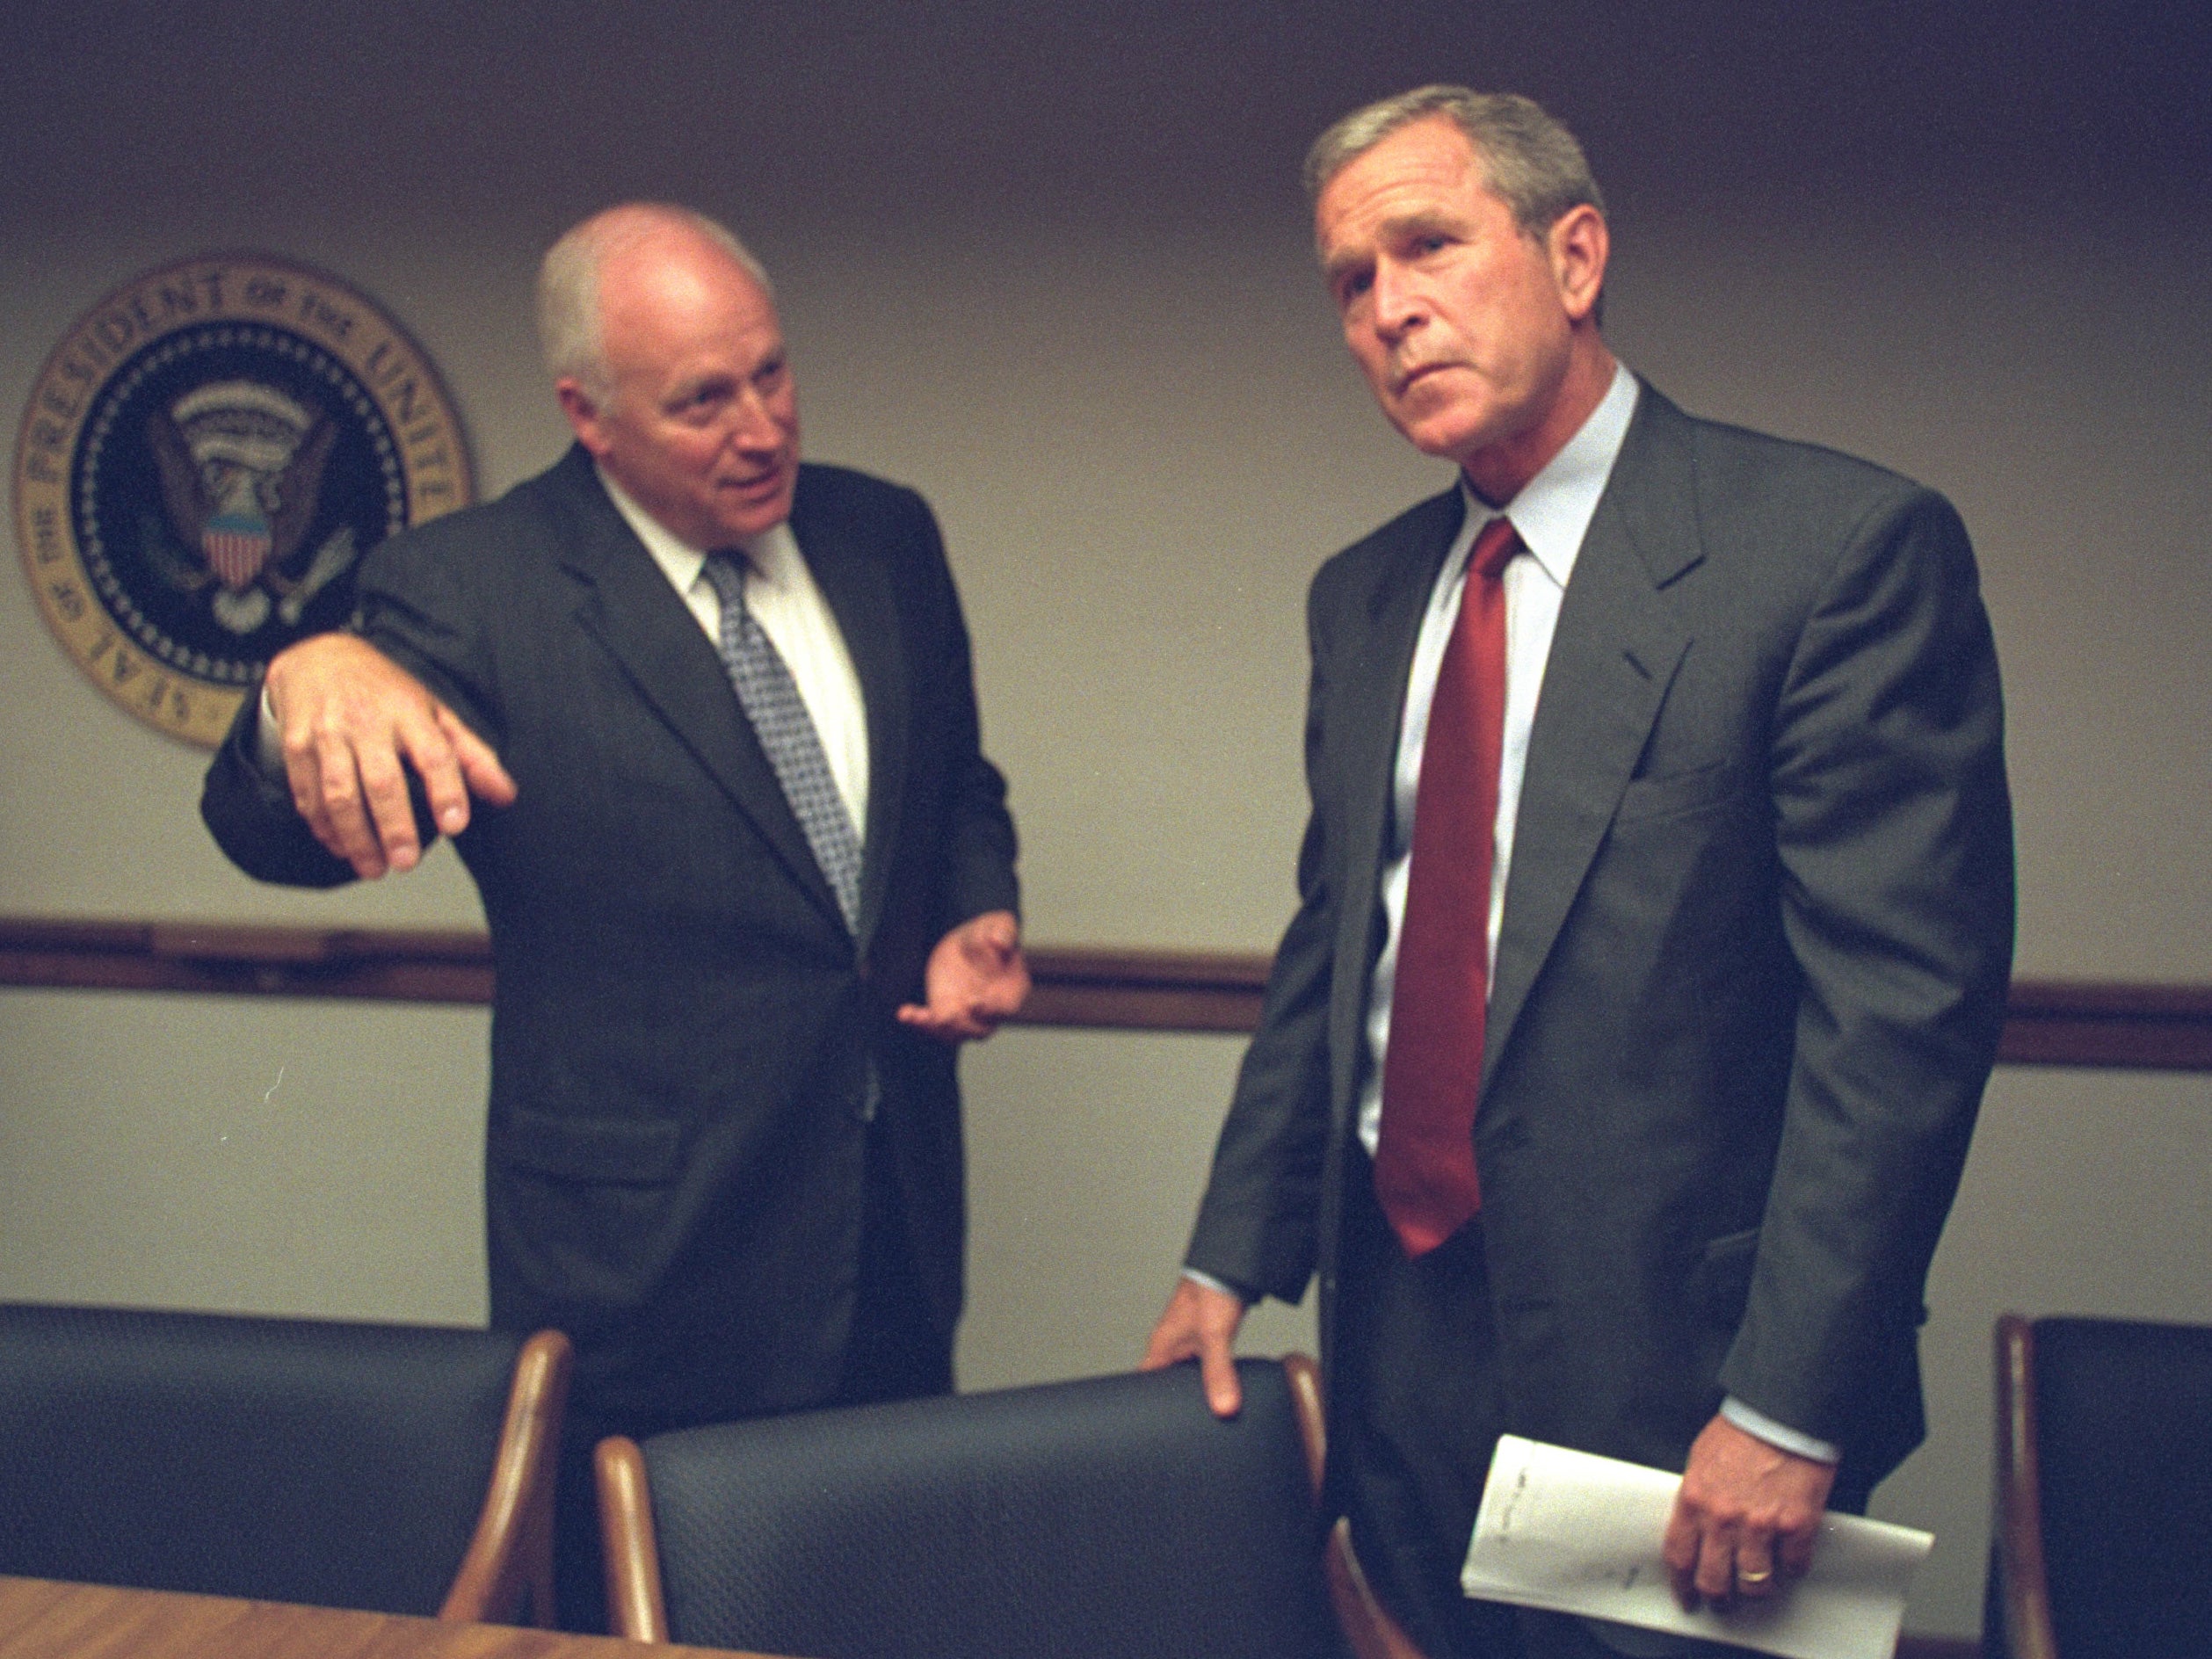 Dick Cheney with former President Bush